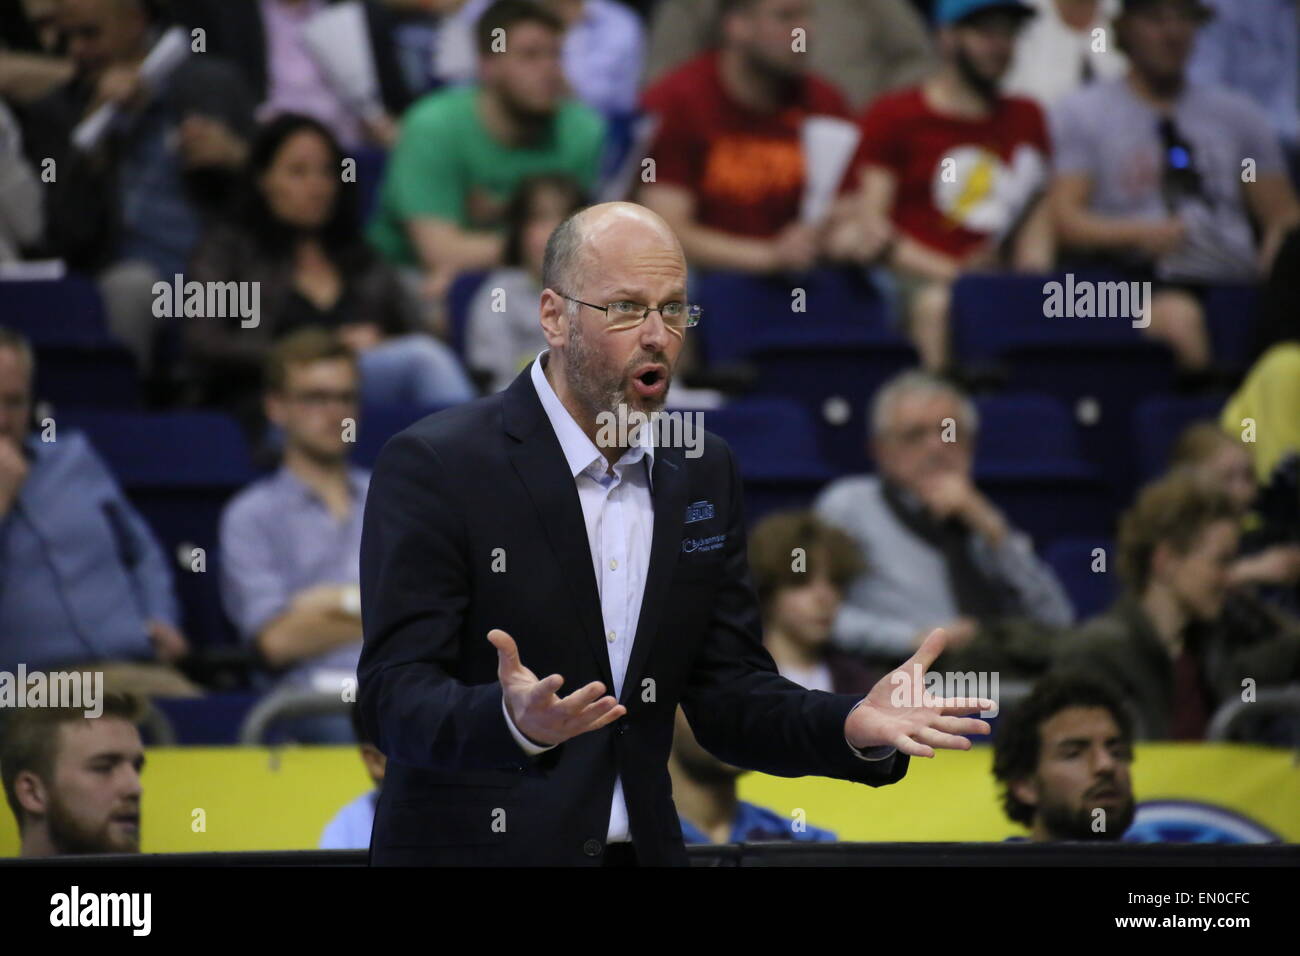 Berlin, Germany. 24th Apr, 2015. Head coach of Crailsheim Merlins Ingo Enskat instructs his players during BBL game Alba Berlin versus Crailsheim Merlins at O2 World. Credit:  Madeleine Lenz/Pacific Press/Alamy Live News Stock Photo